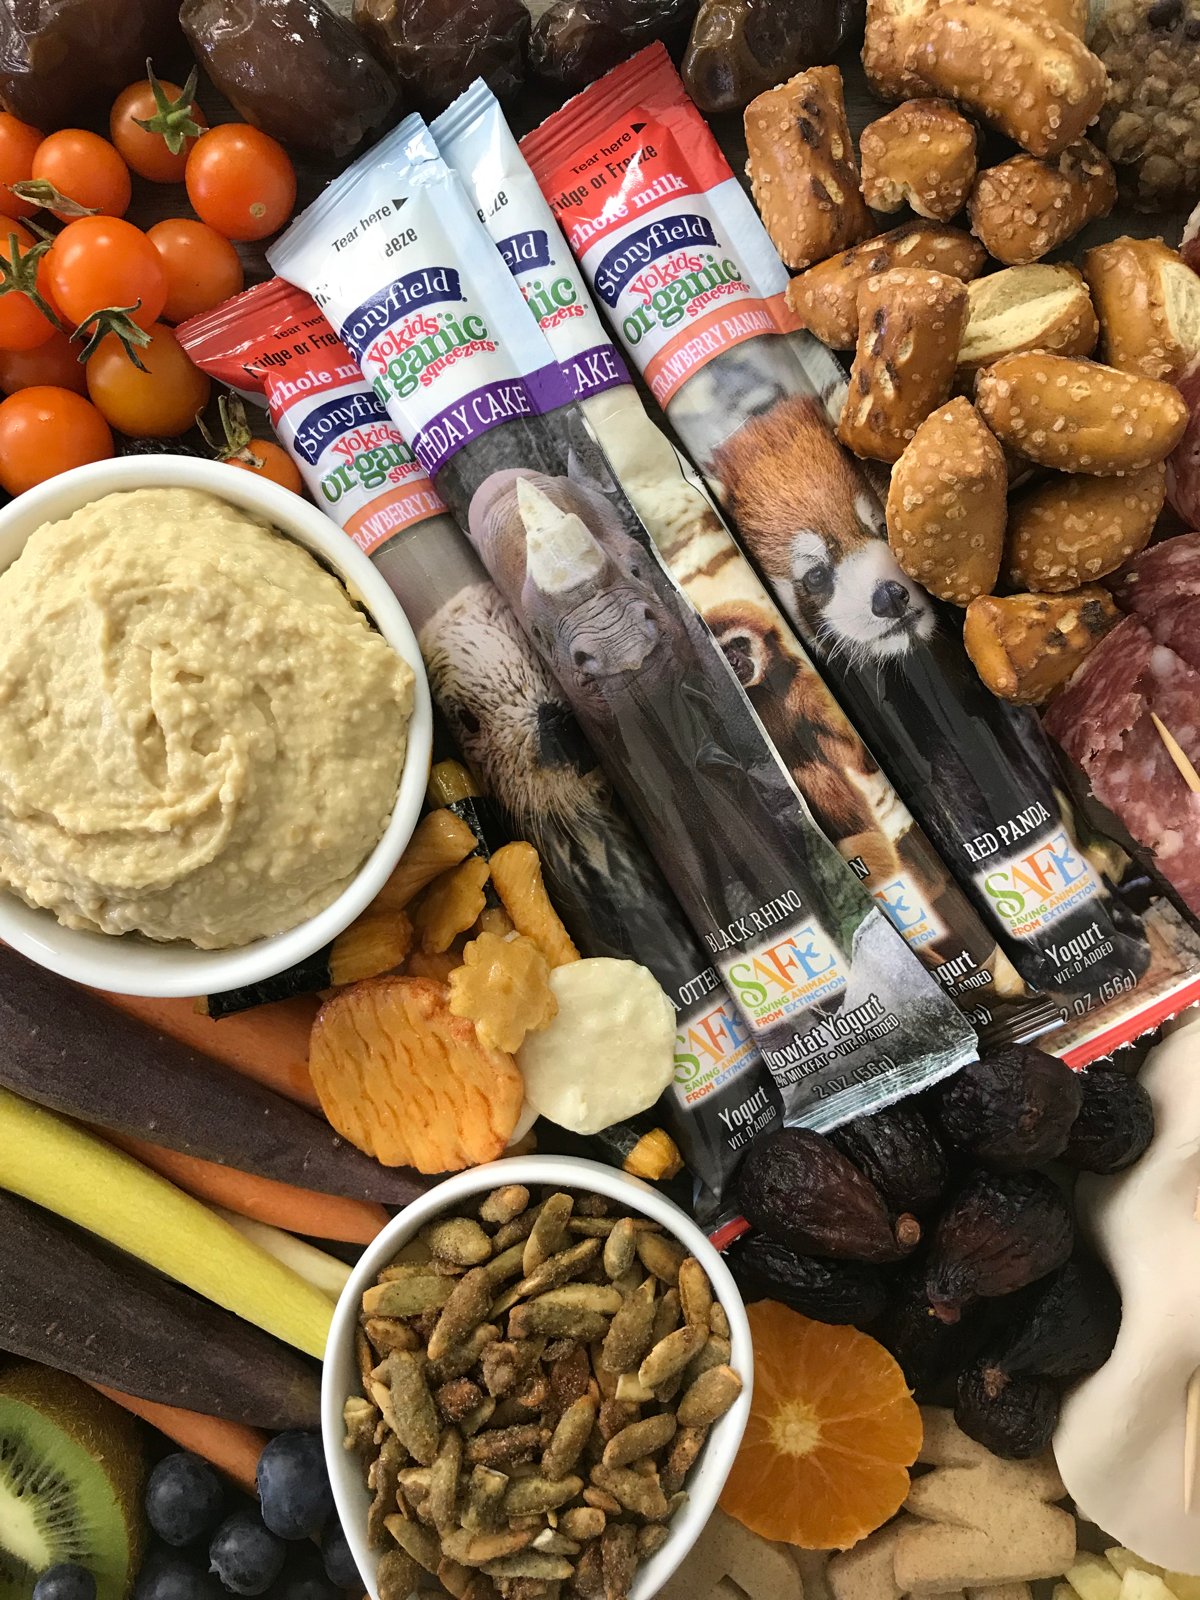 Epic Snack Platter from Weelicious.com